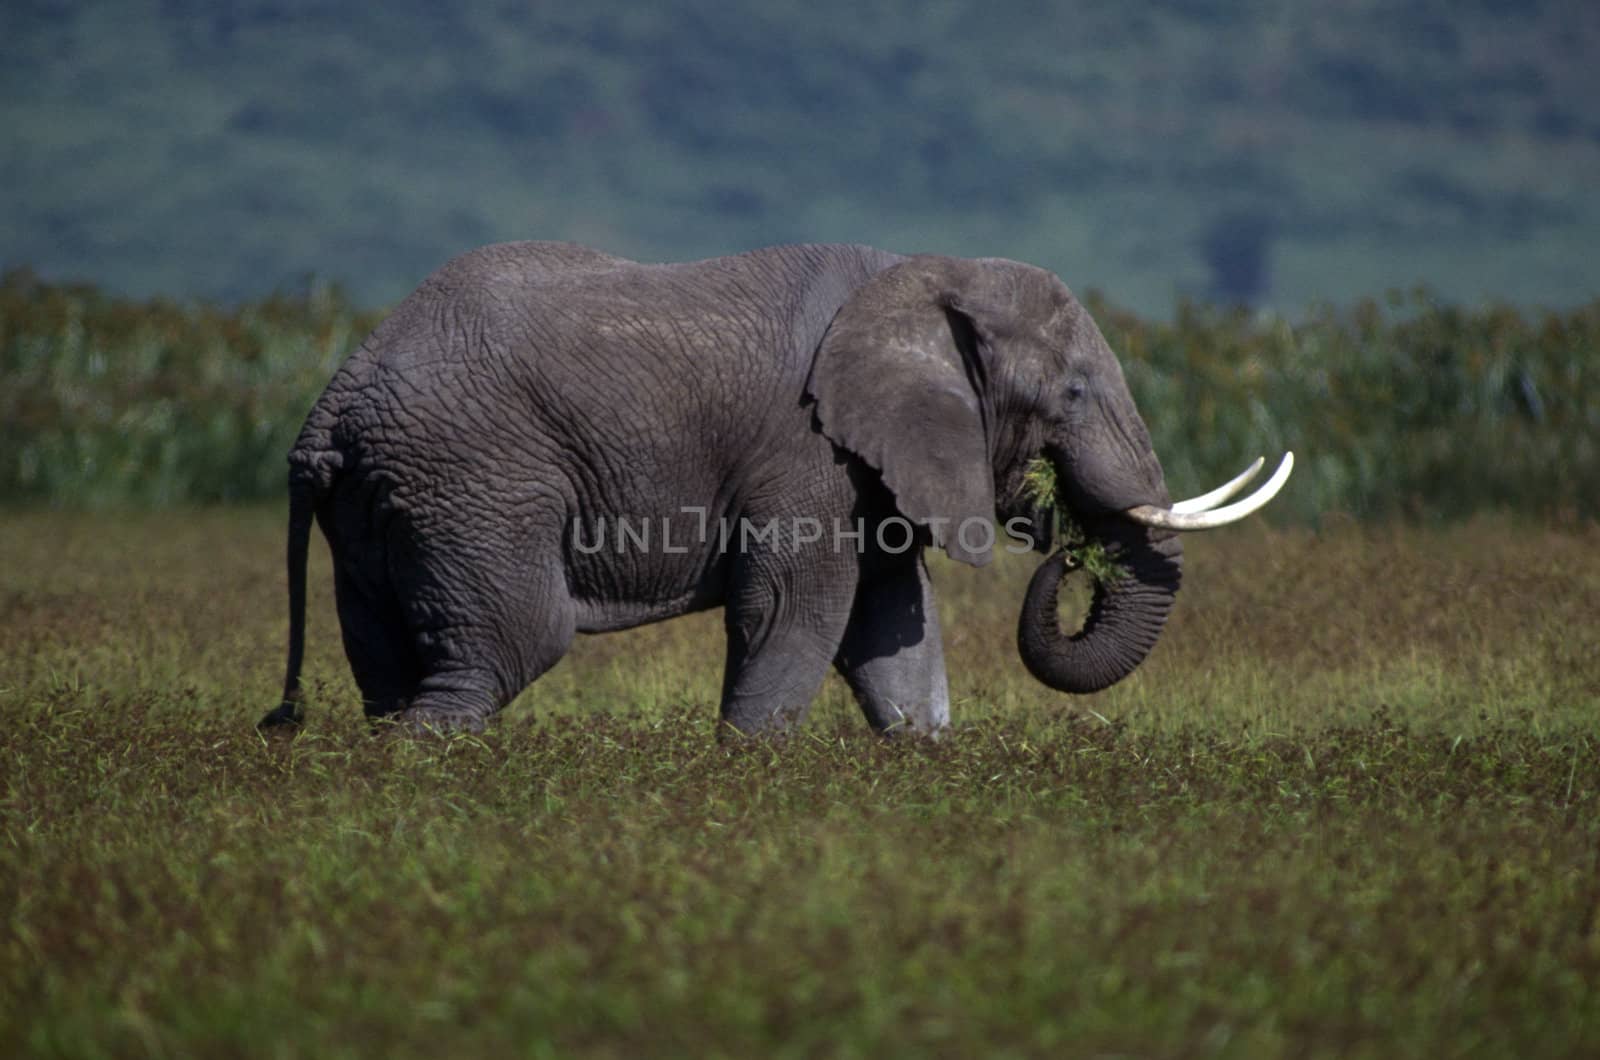 Adult elephant on the plain with green grass.